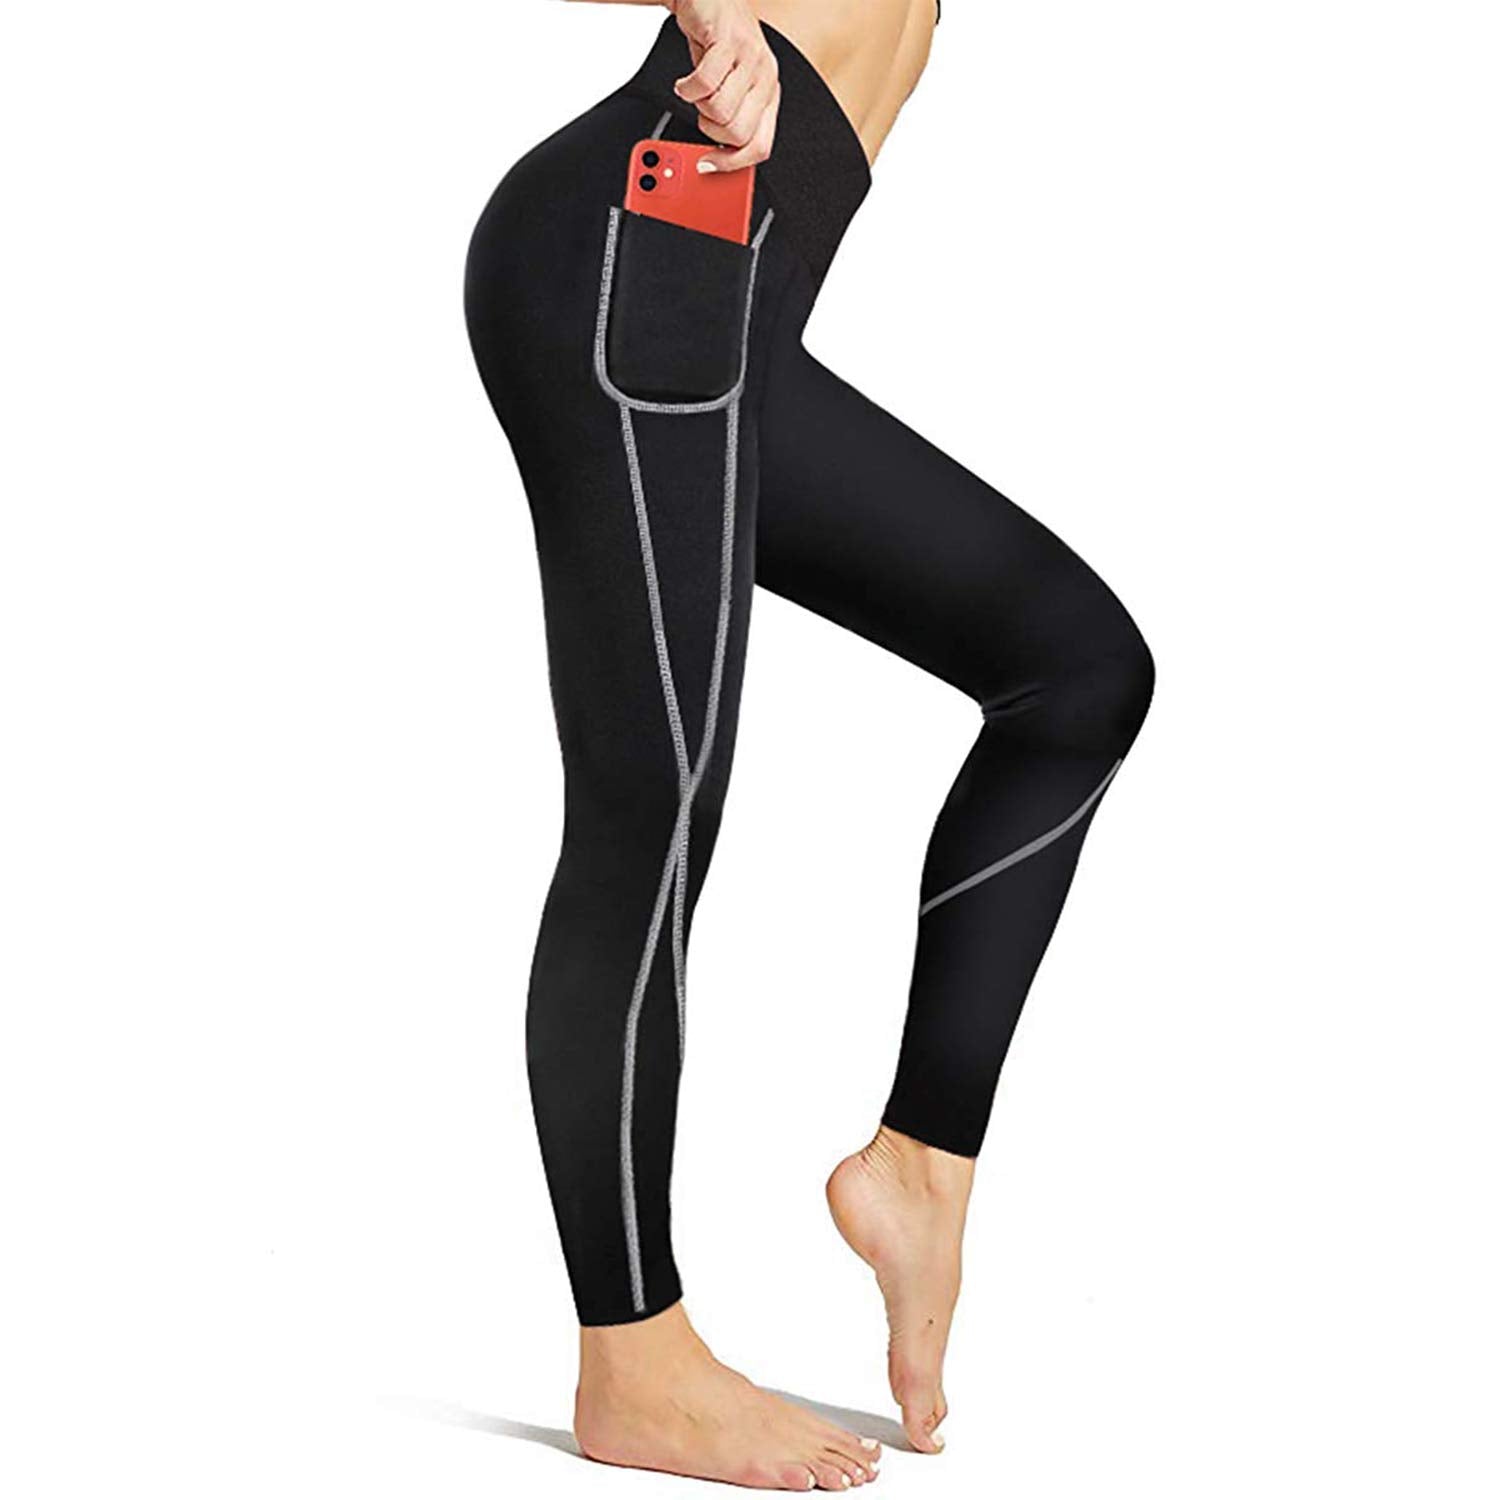 Gotoly Women Sauna Weight Loss Slimming Neoprene Pants with Side Pocket Hot Thermo Sweat Leggings